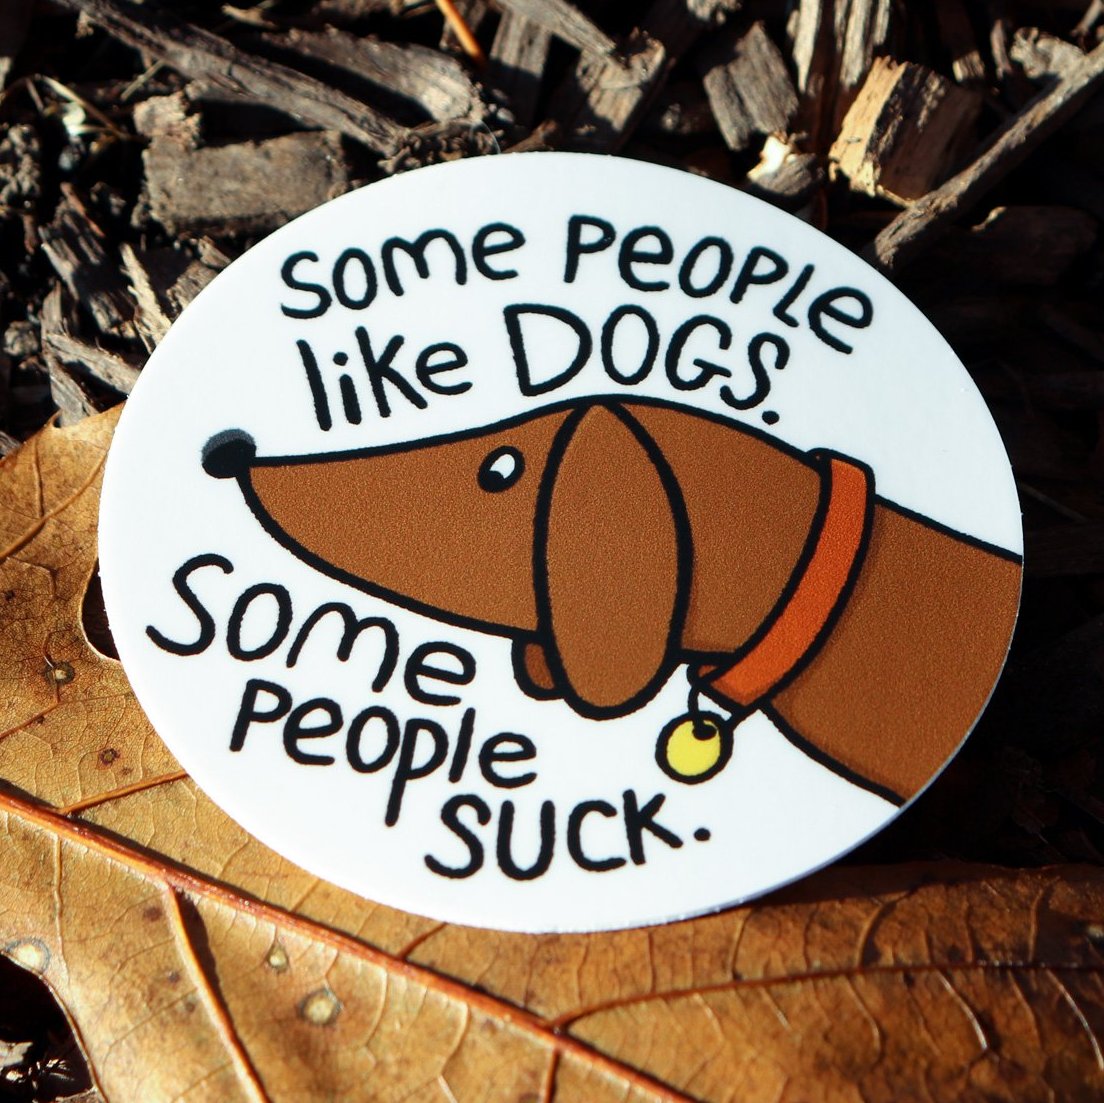 Some people like dogs... sticker